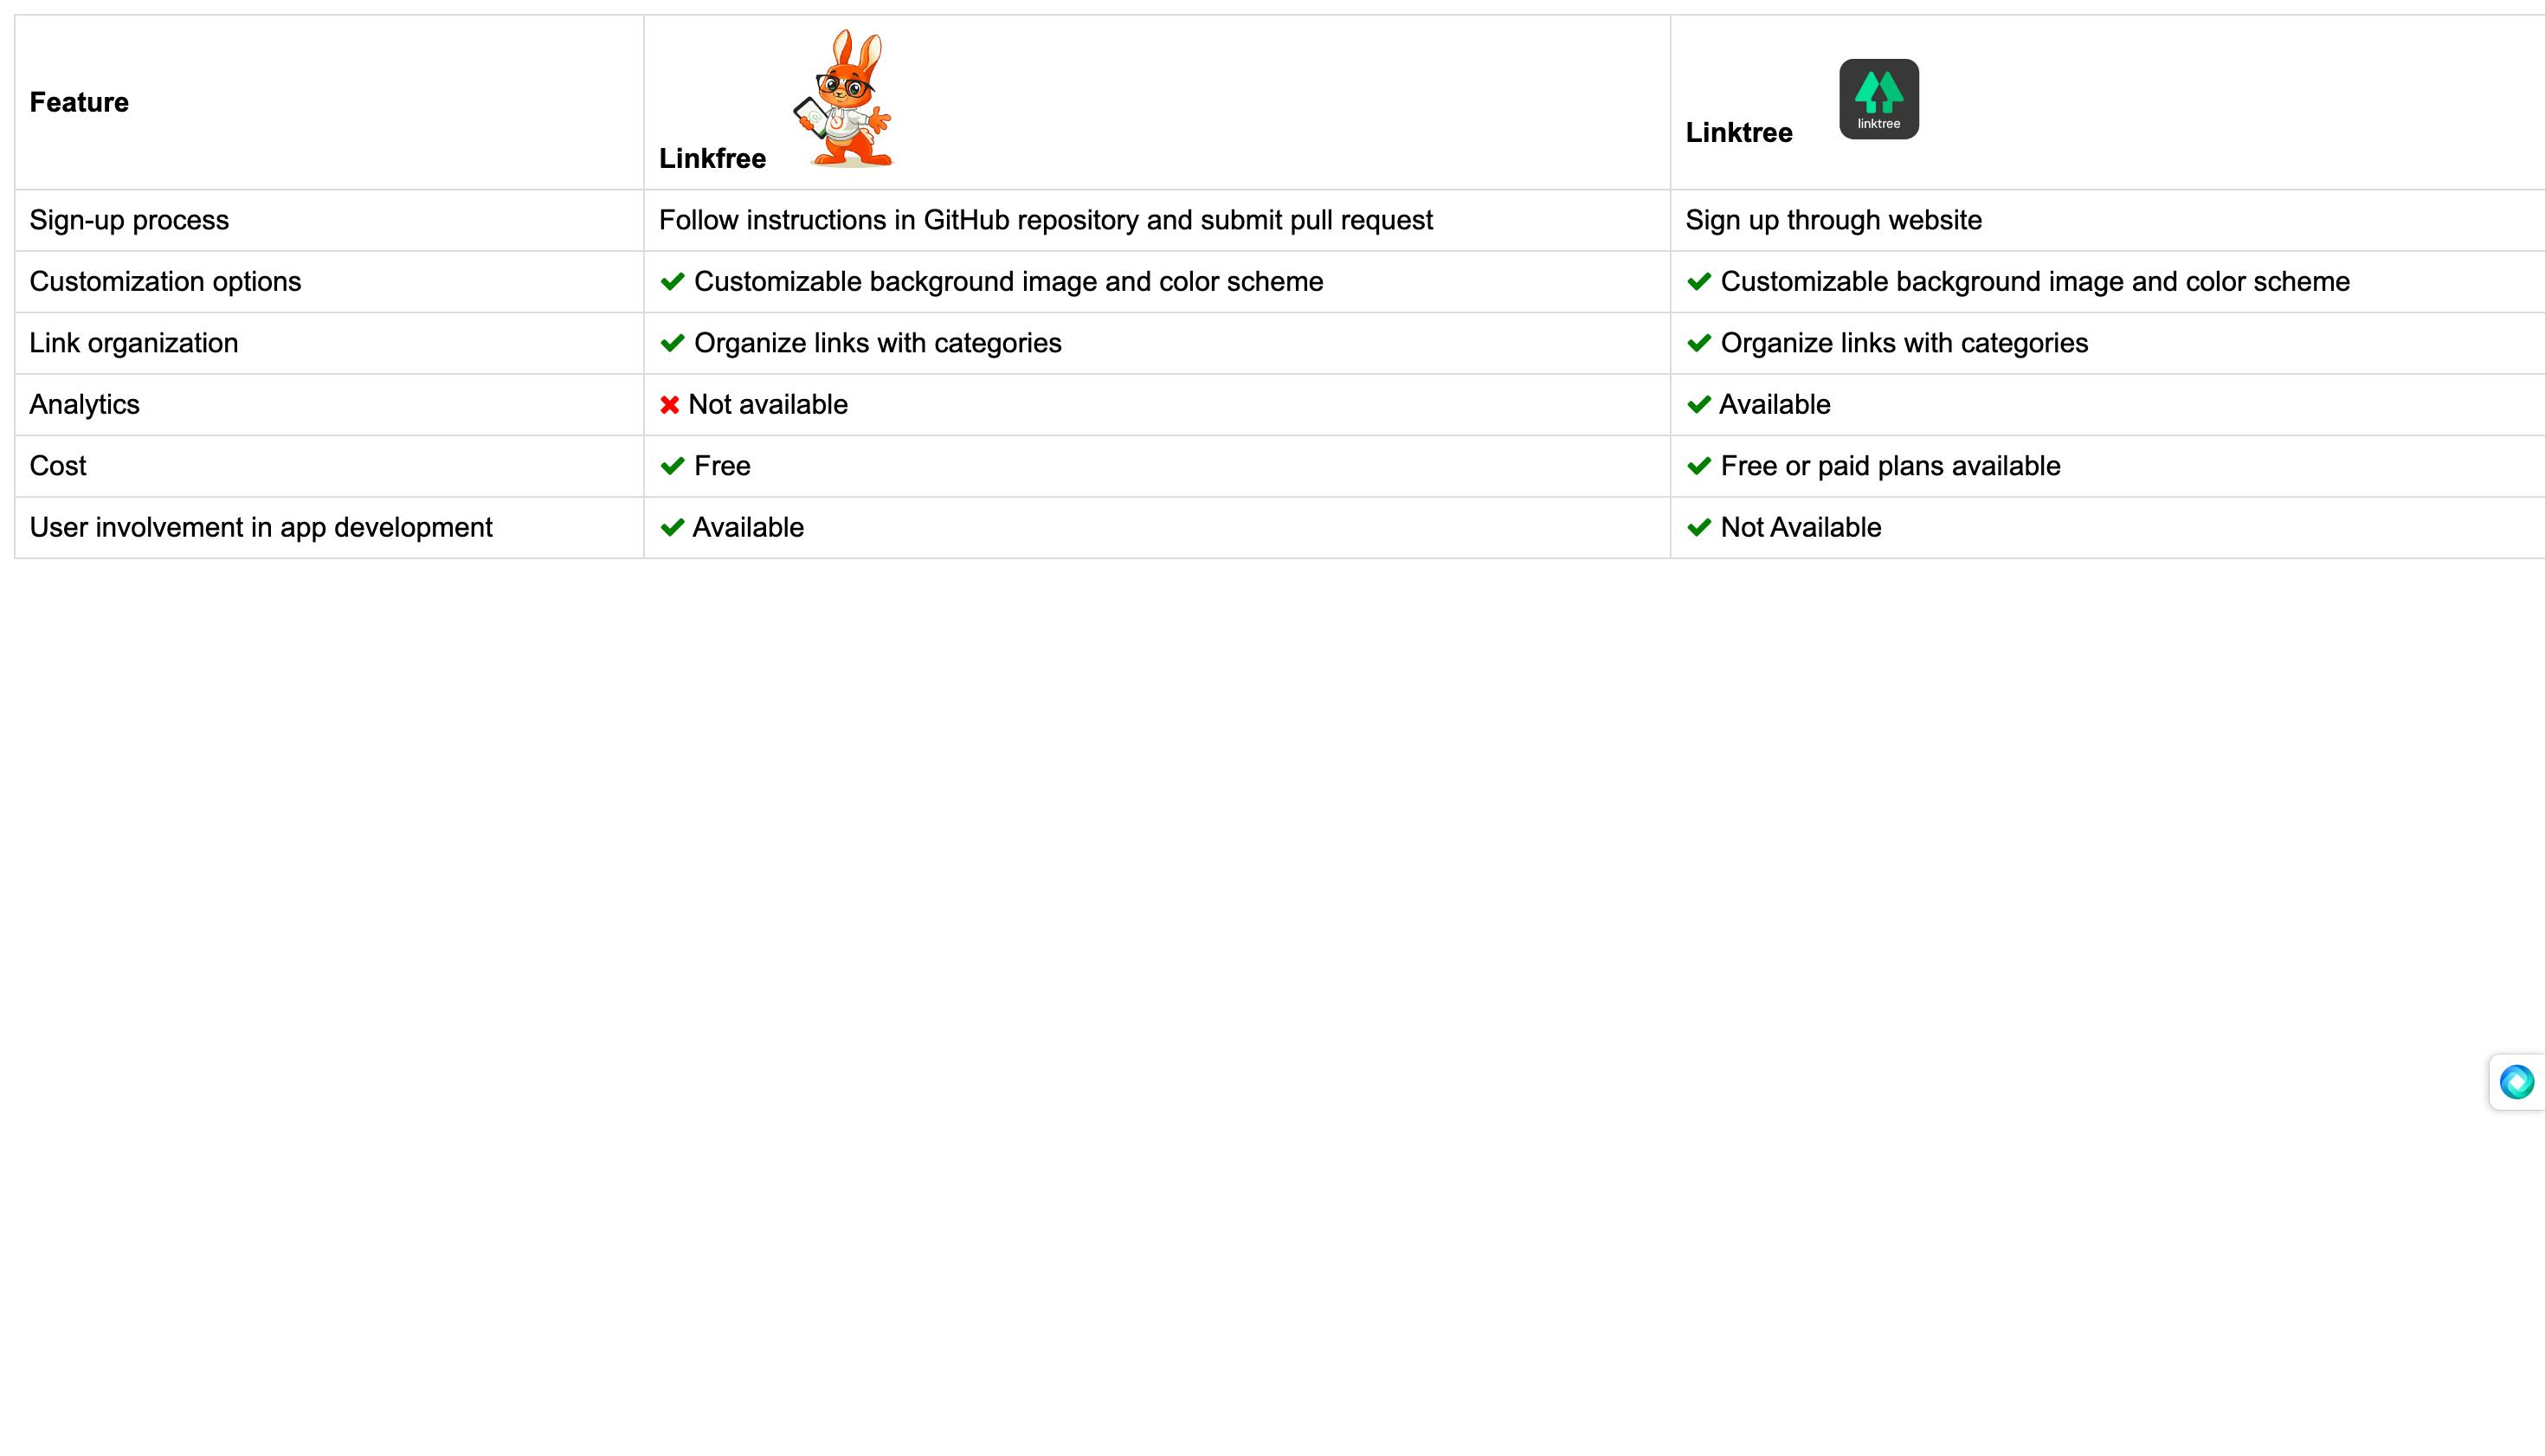 A Comparison chart between Linkfree and Linktree